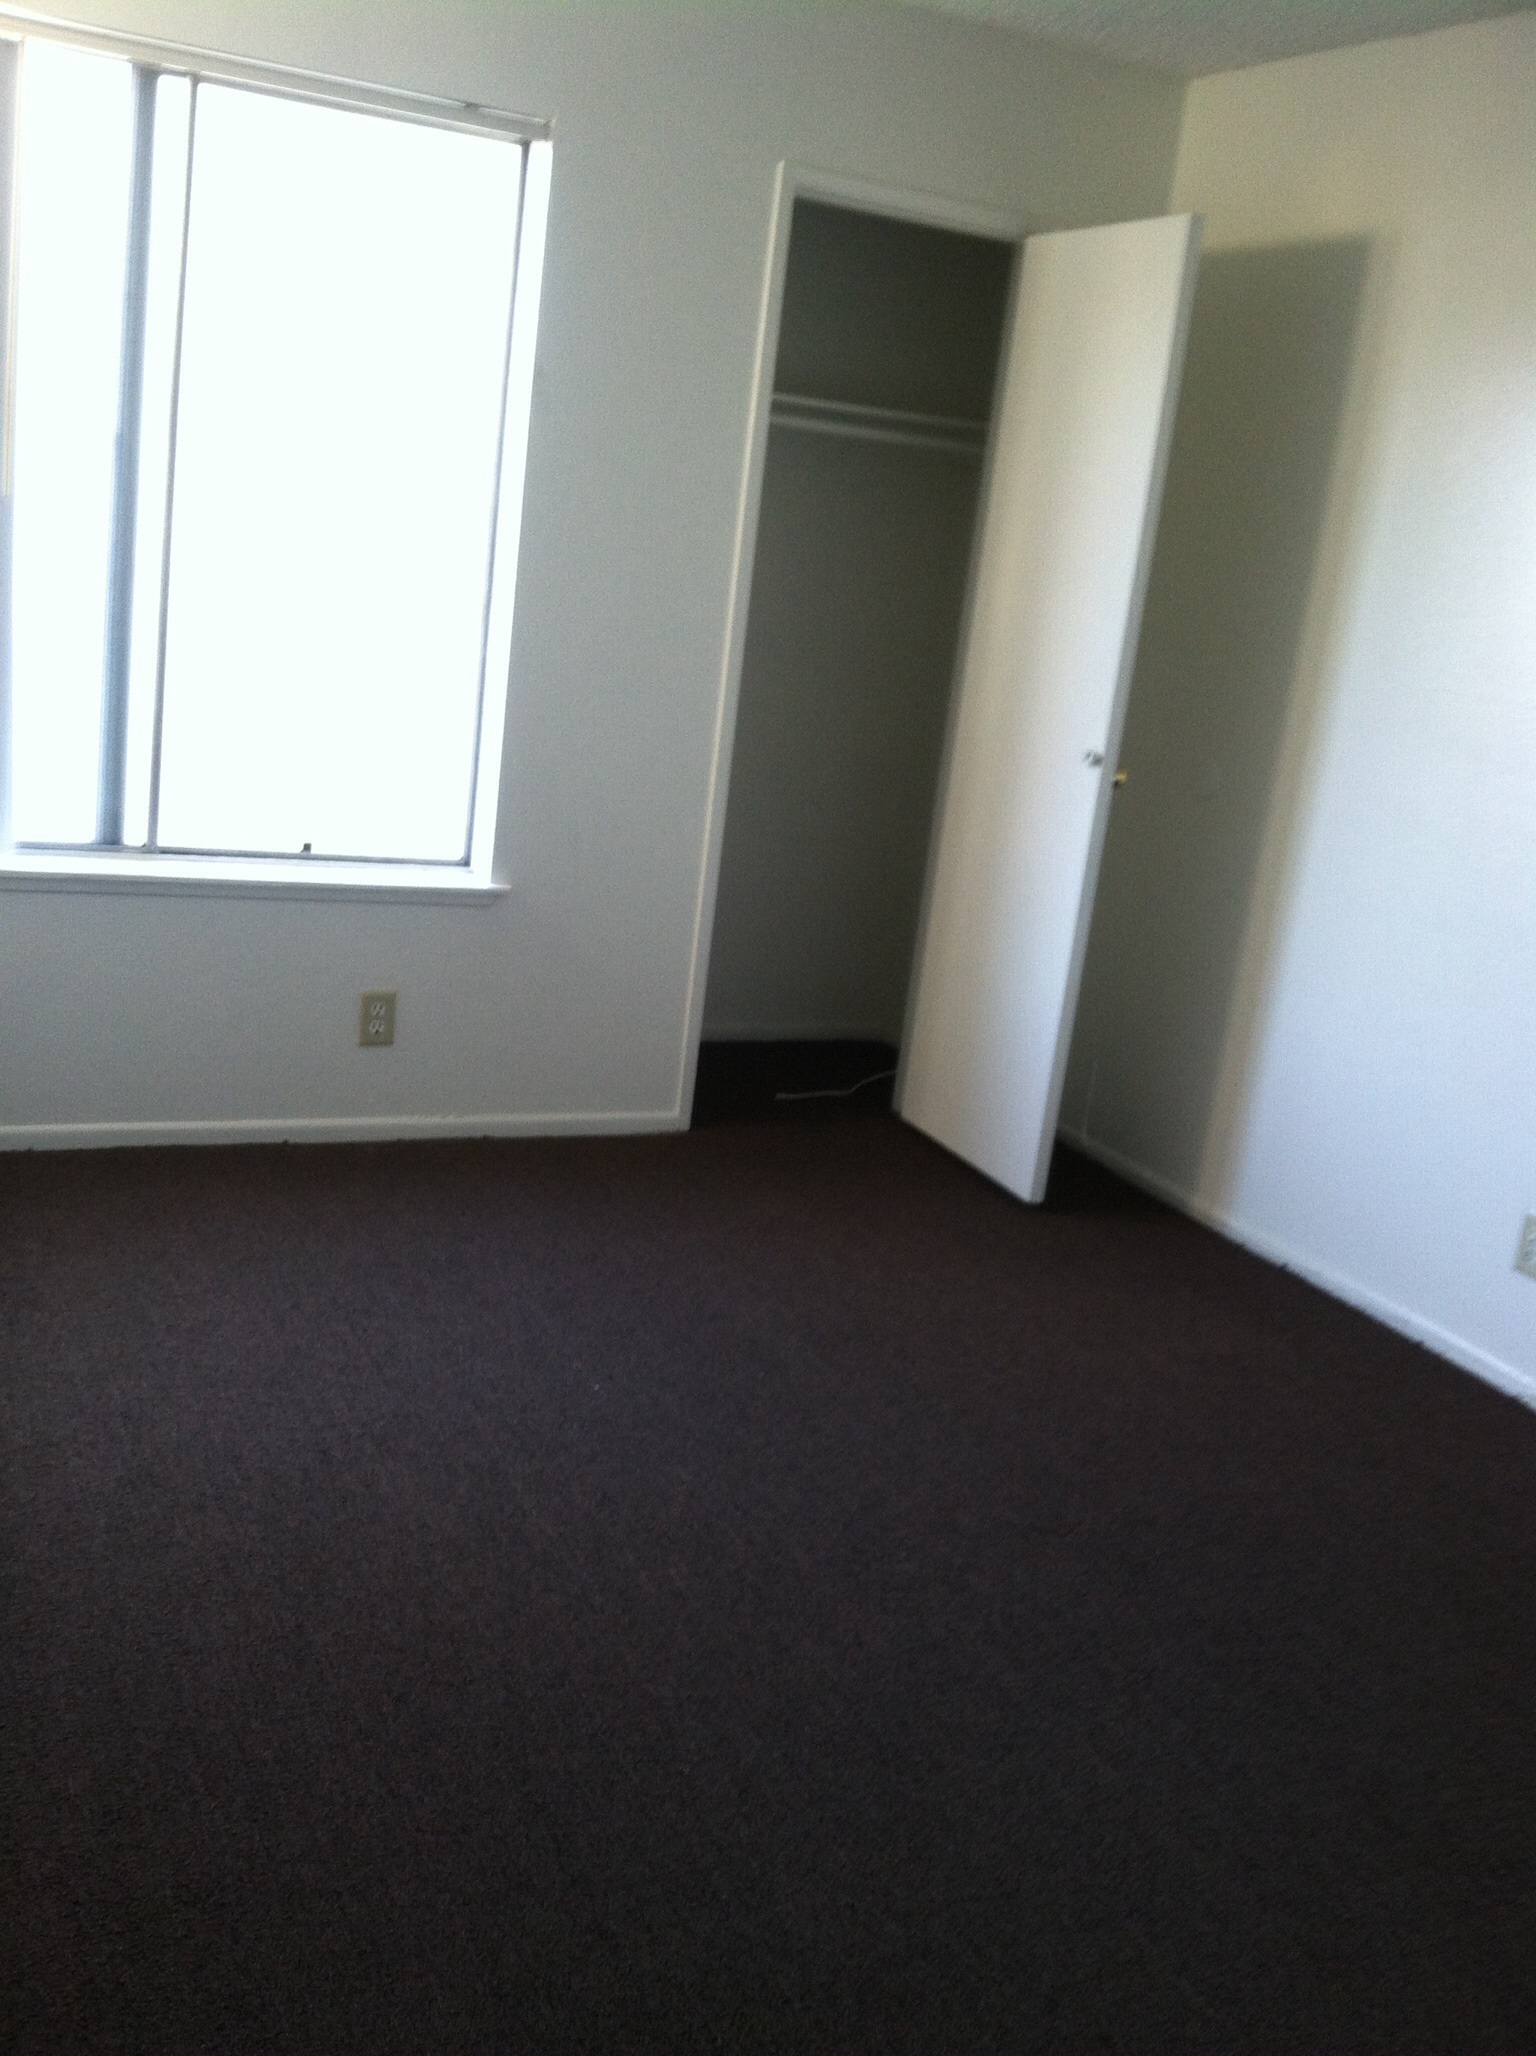 Interior view of an empty room in a unit at Ingram Prservation showing a small closet and large window